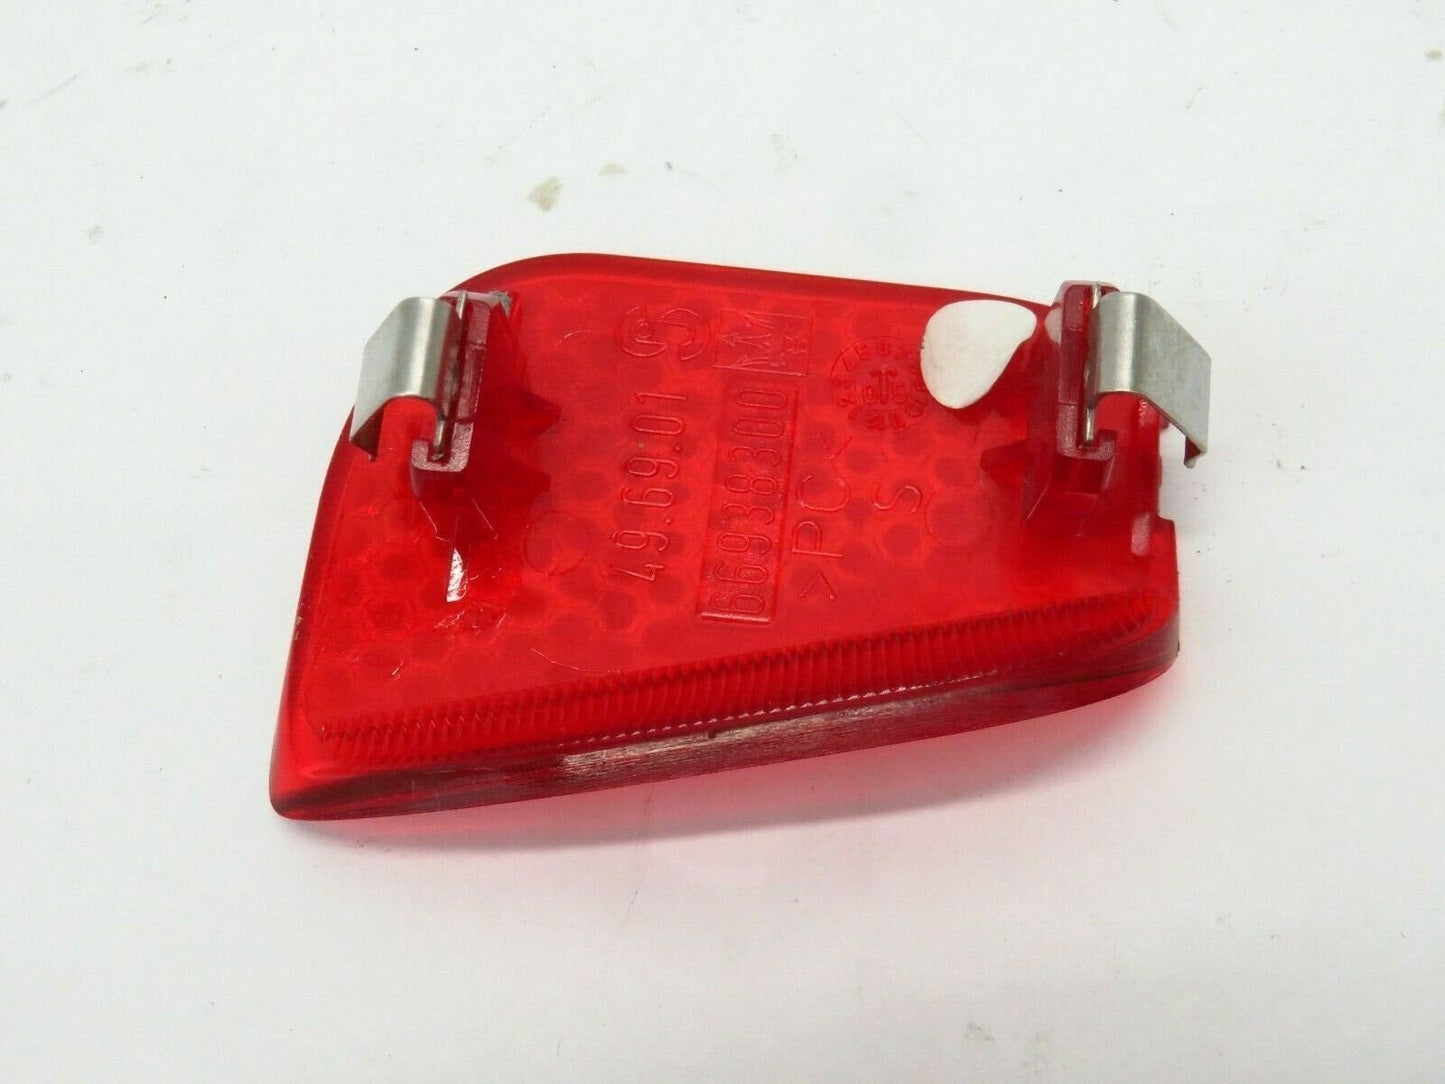 2006 Maserati Quattroporte Driver Door Reflector Red Front or Rear M139 LH 04-12